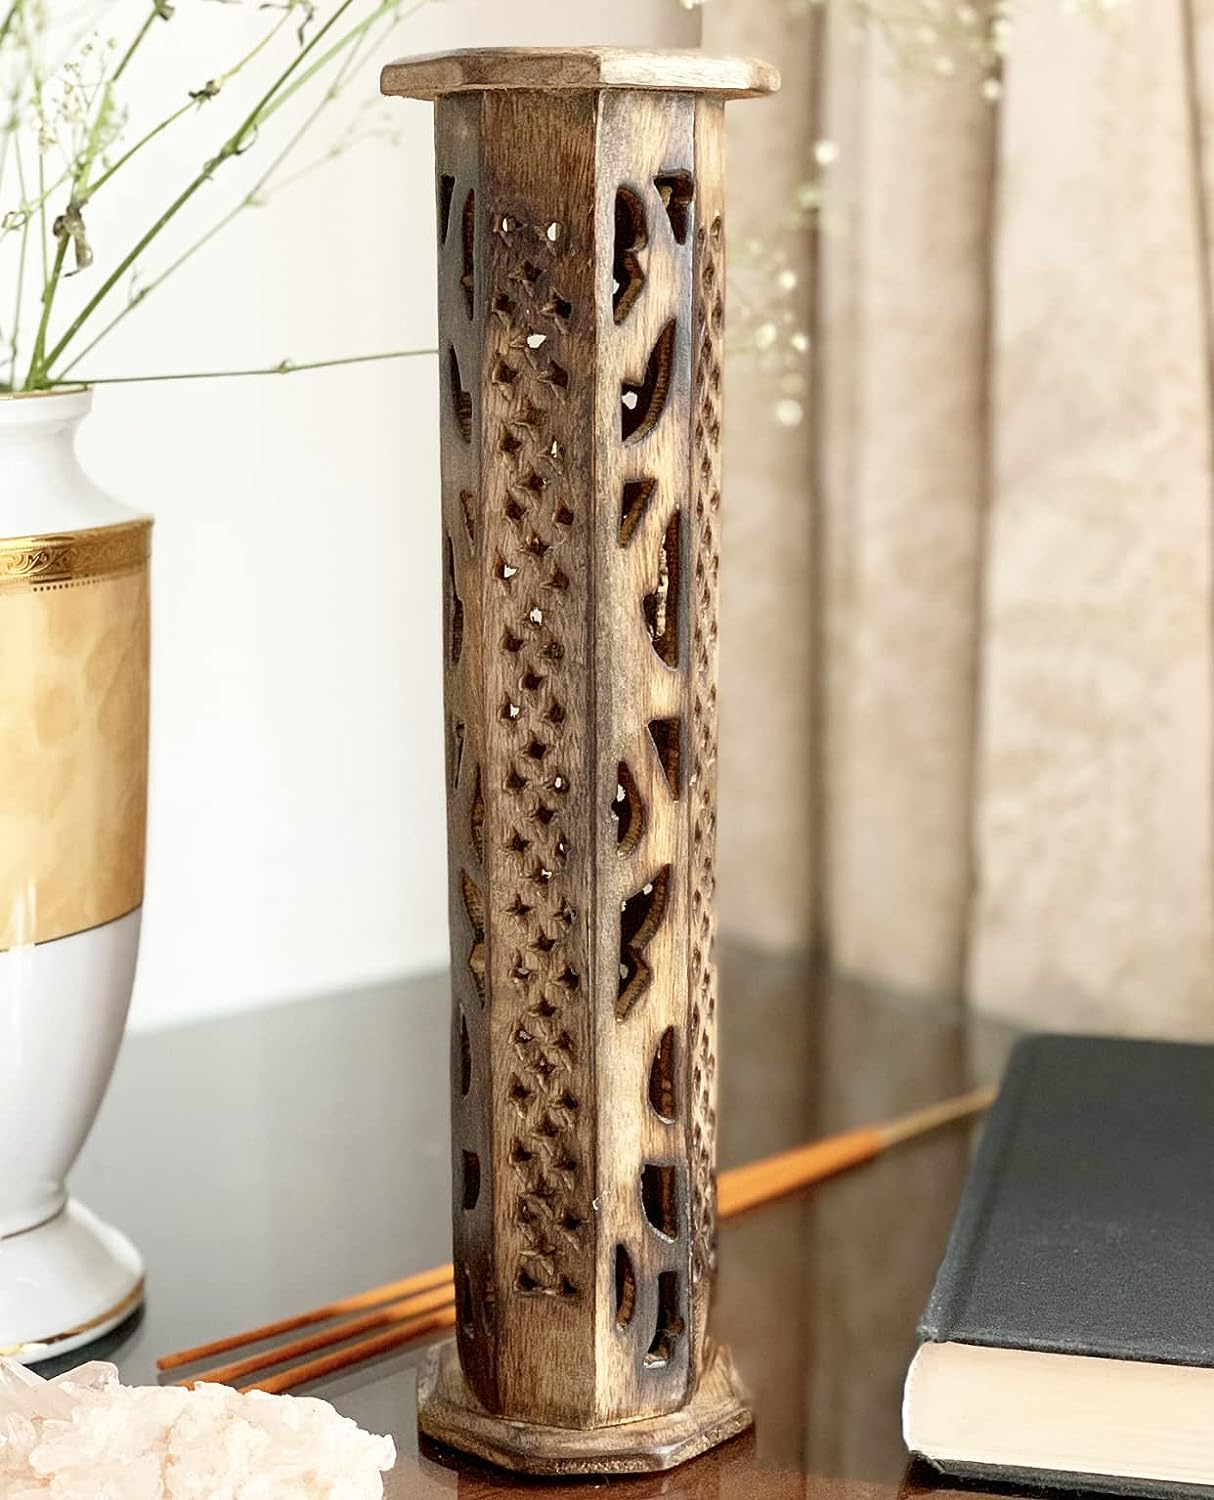 Wooden Incense Stick  Cone Burner Holder Tower Large Organic Eco Friendly Ash Catcher Agarbatti Holder Rustic Style Hand Carved for Meditation Yoga Aromatherapy Home Fragrance Products (Natural)